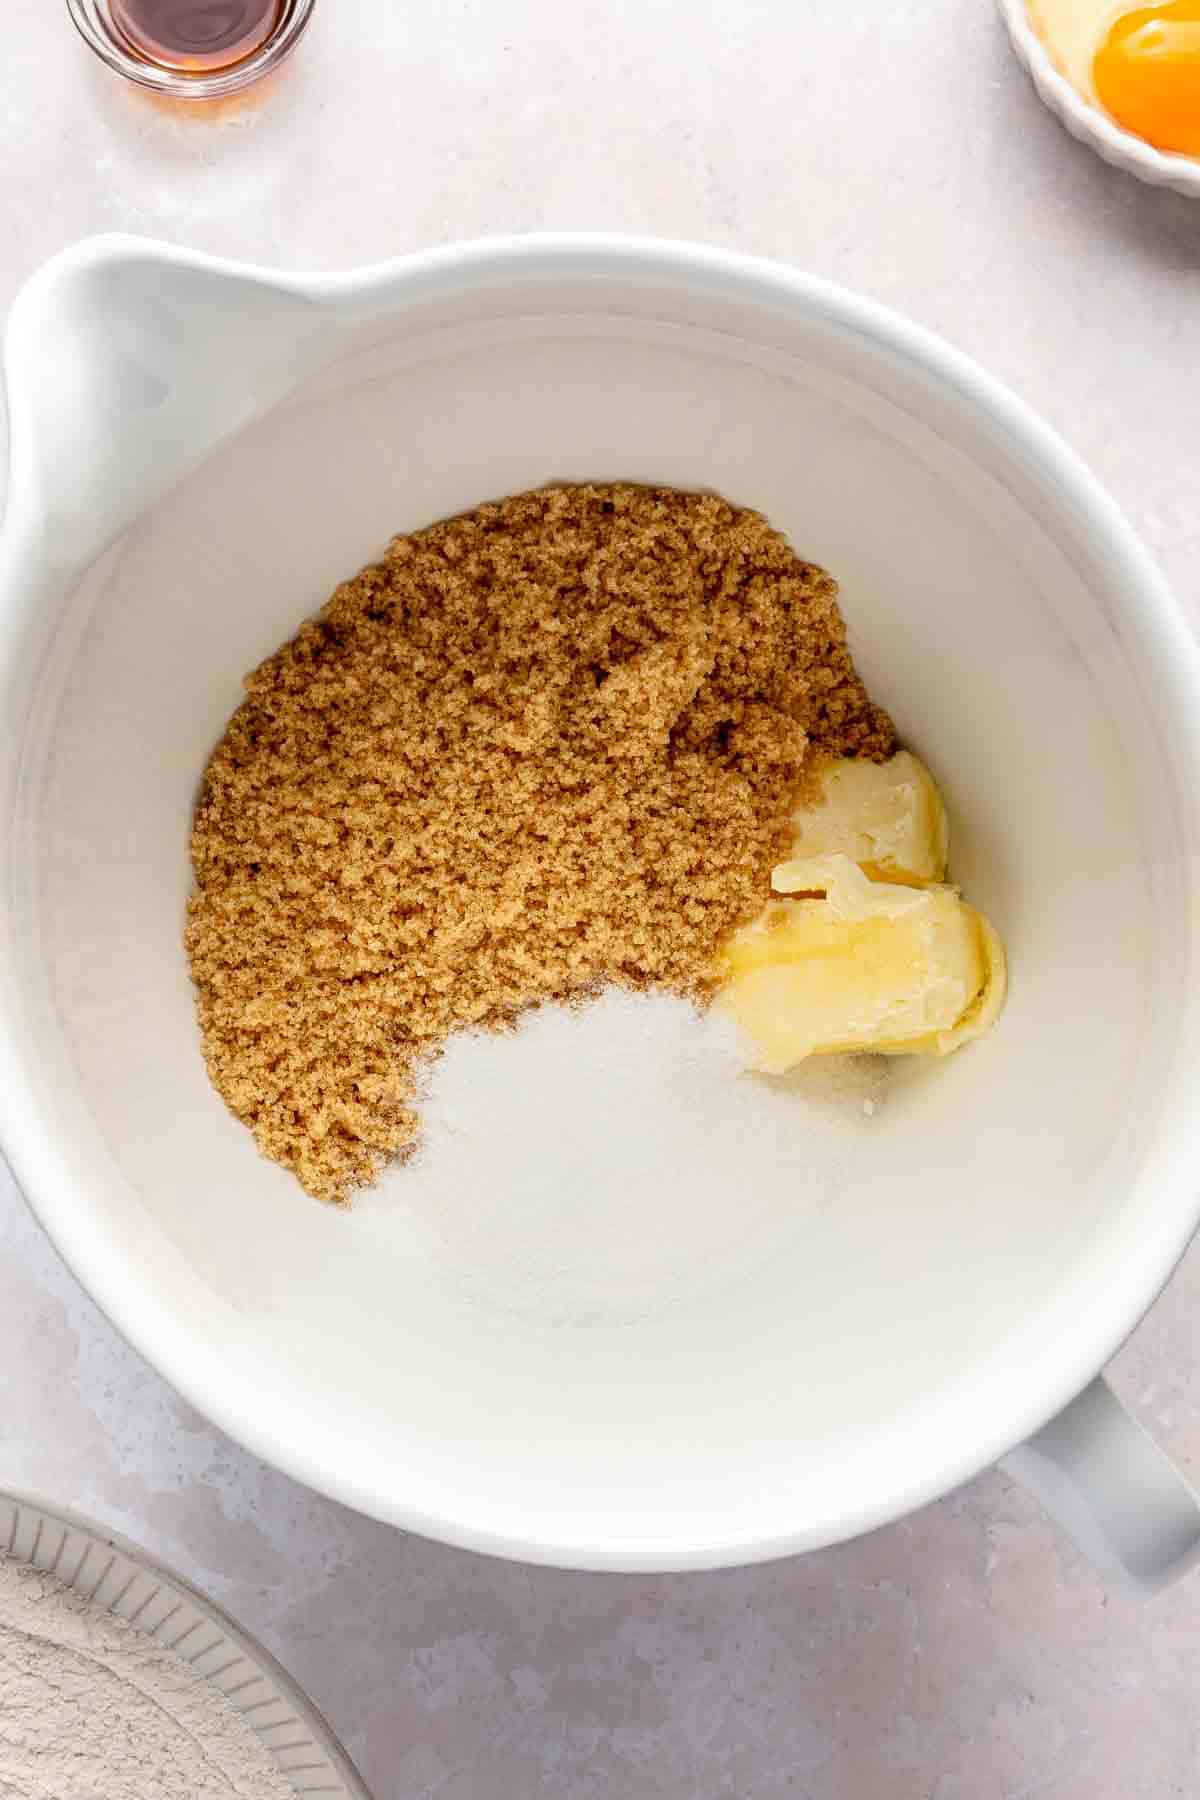 Butter and sugars in a white mixing bowl.